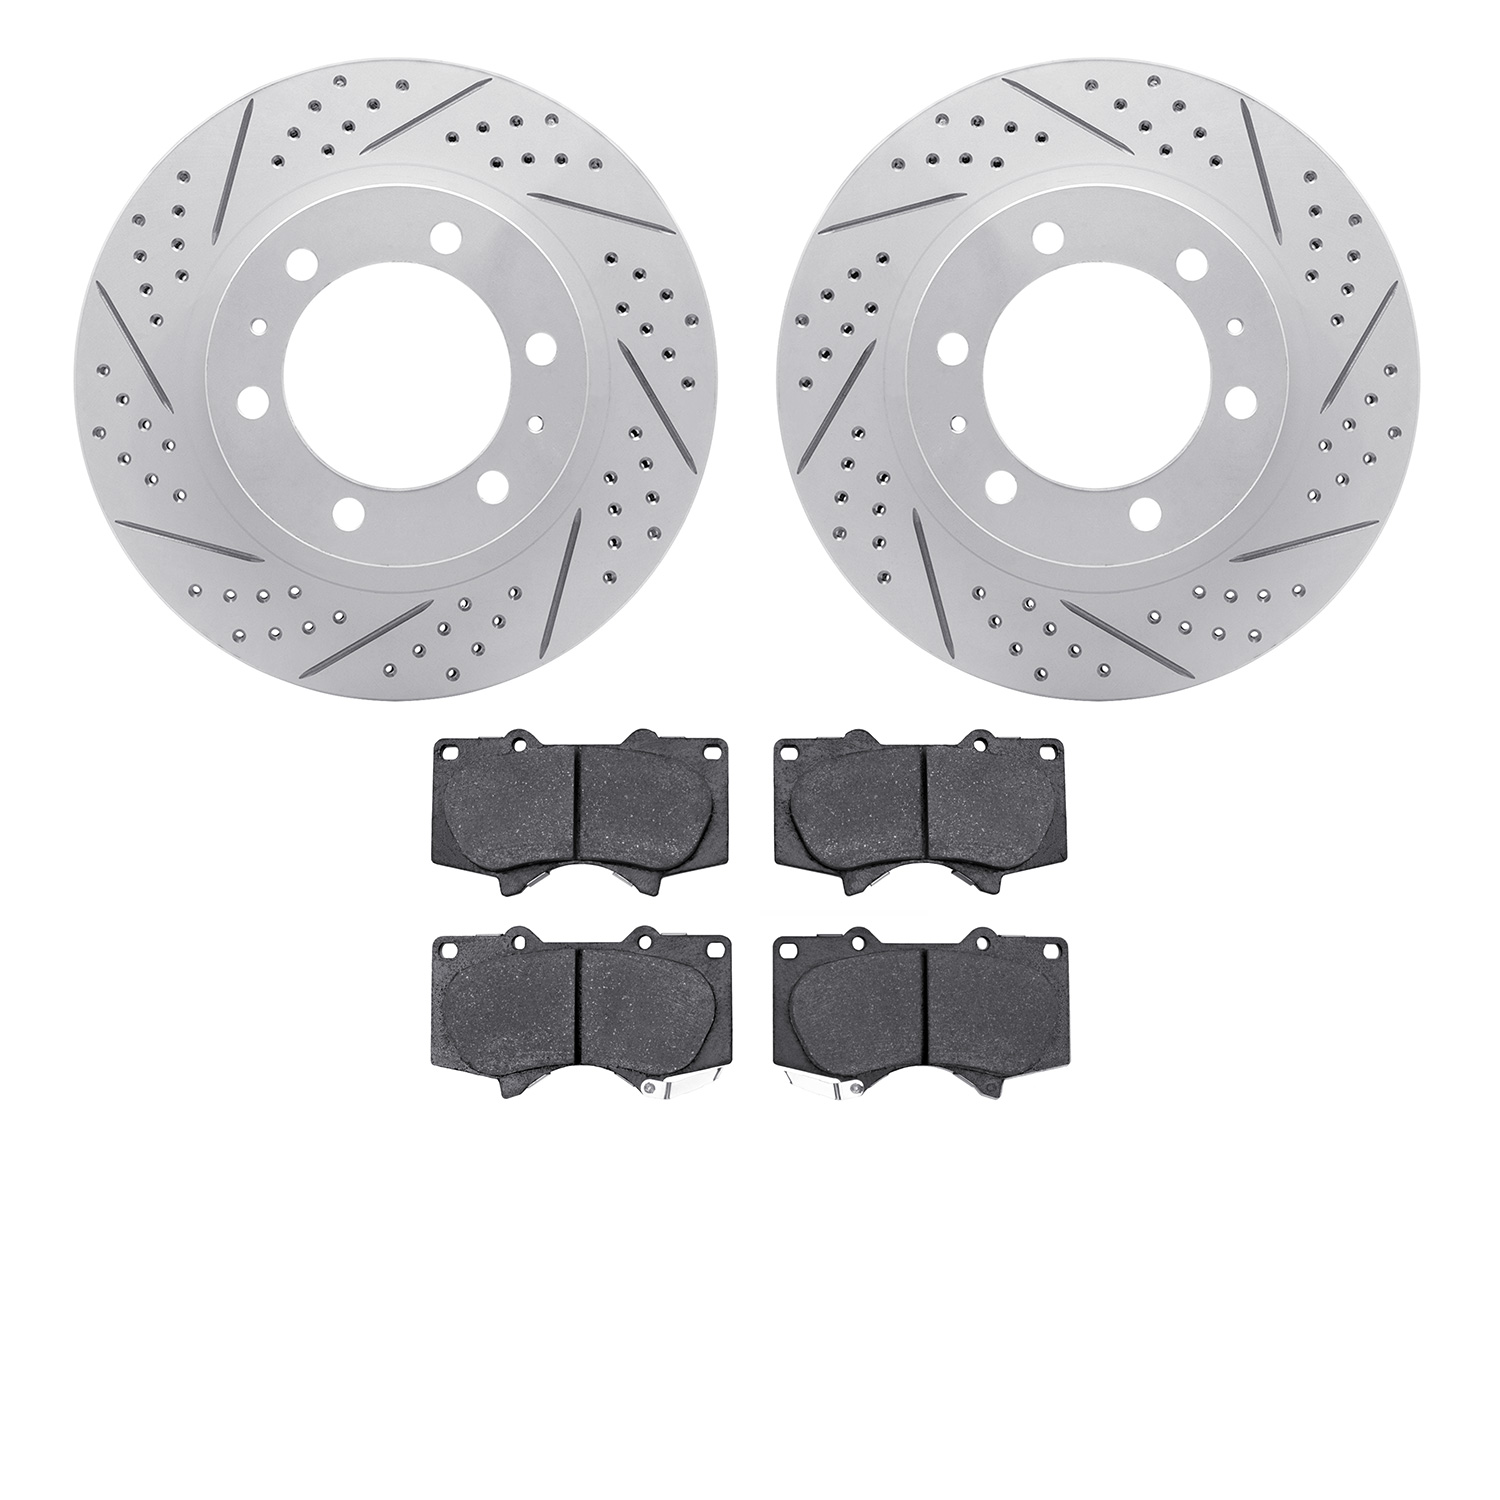 2502-76147 Geoperformance Drilled/Slotted Rotors w/5000 Advanced Brake Pads Kit, Fits Select Lexus/Toyota/Scion, Position: Front